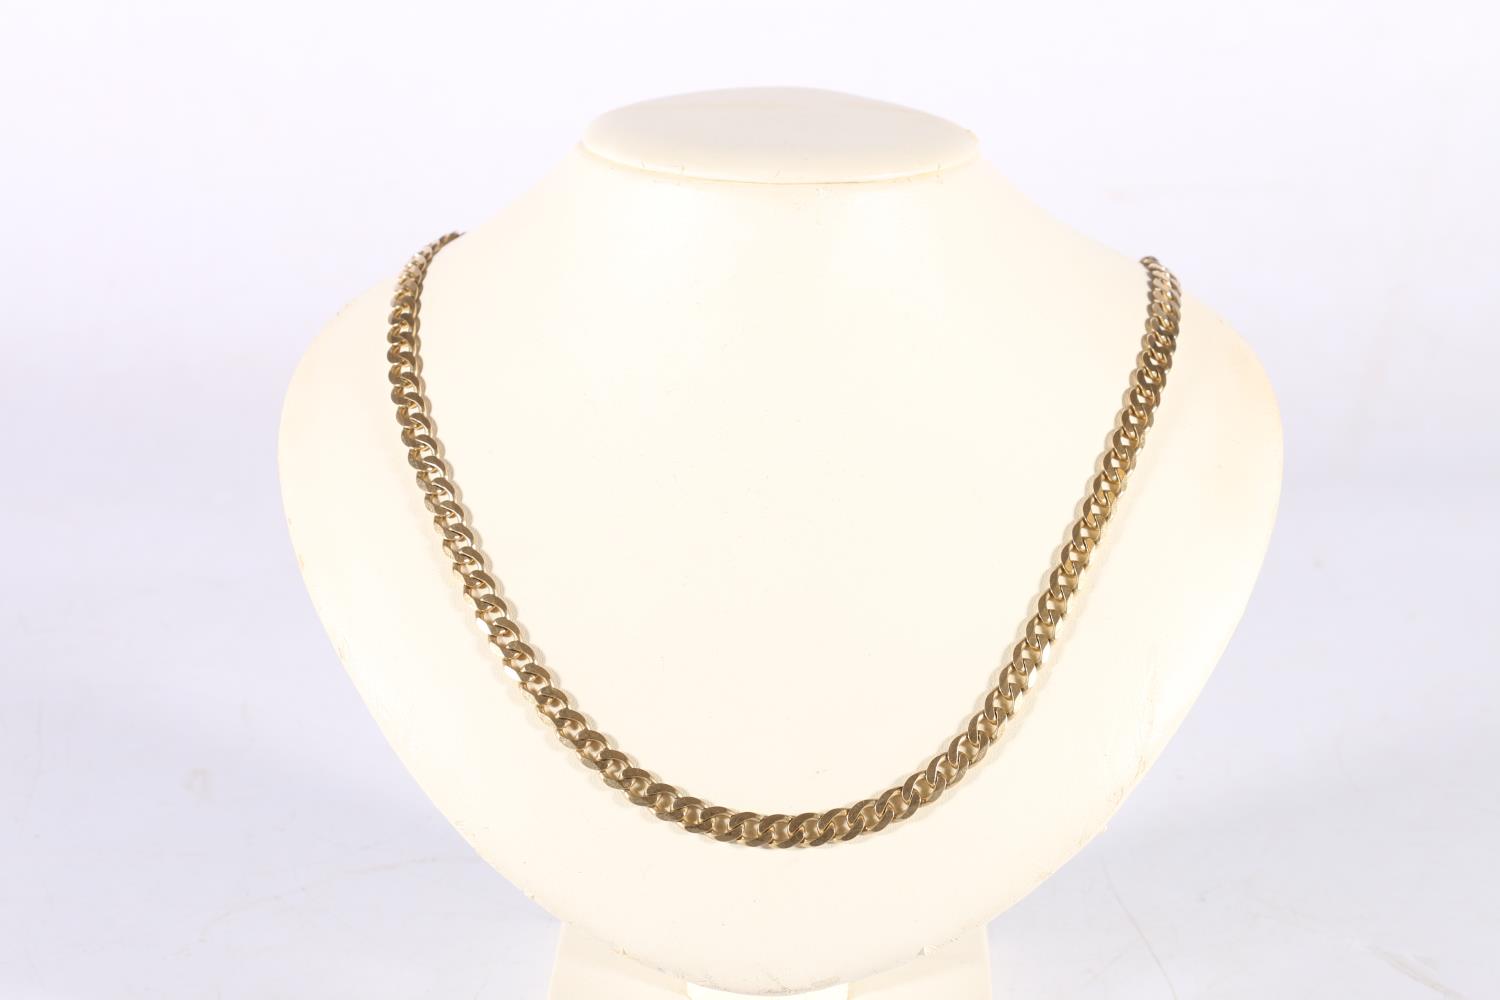 9ct yellow gold flattened curb link neck chain 28.6g